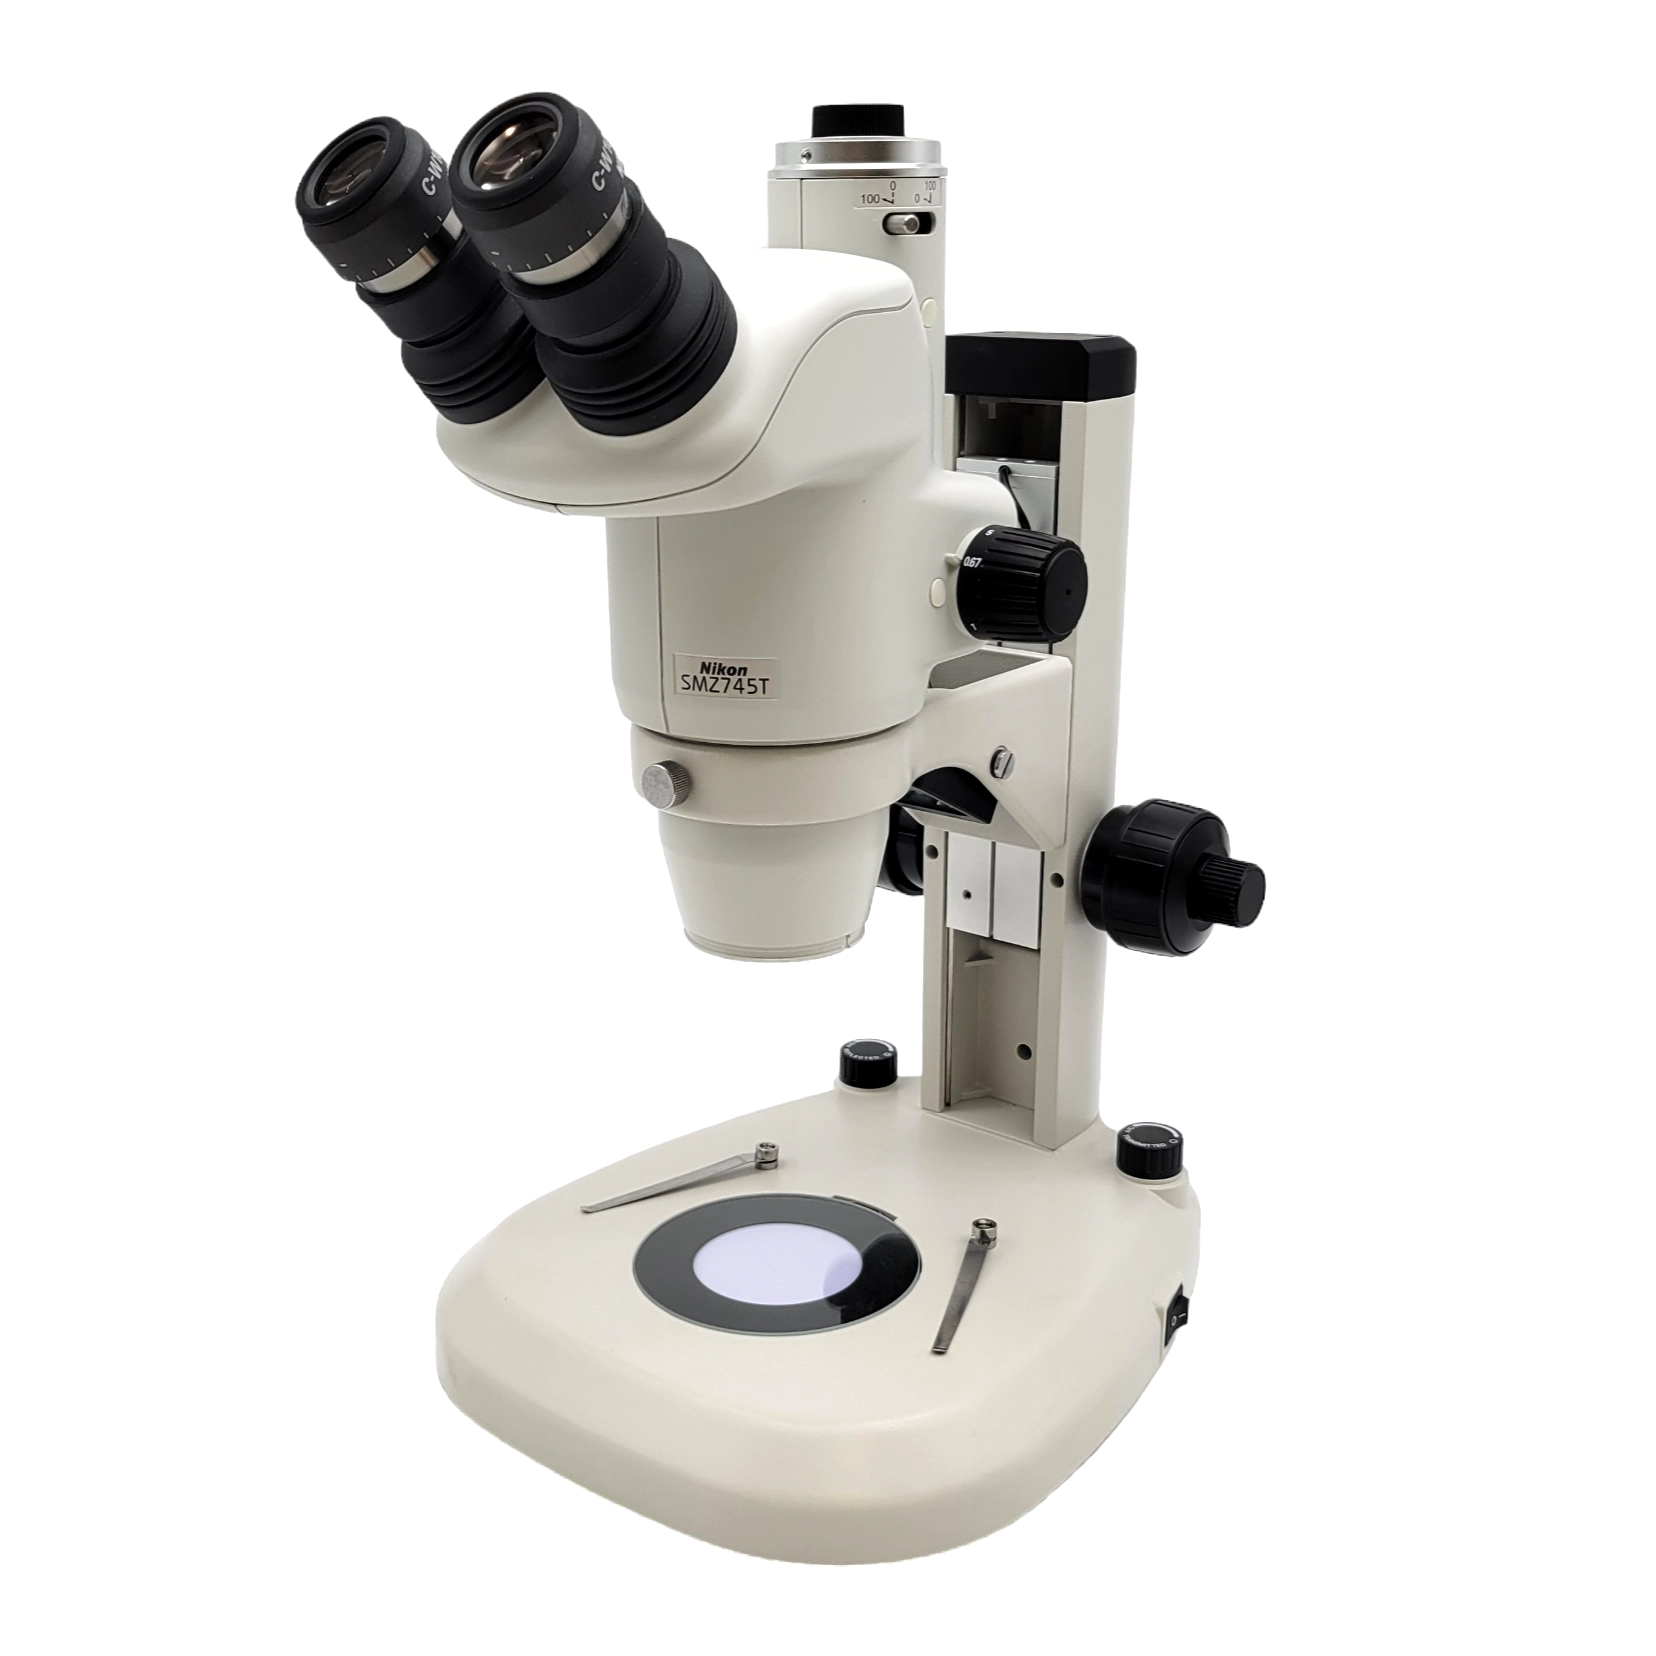 Nikon Stereo Microscope Trinocular SMZ745T with Transmitted &amp; Reflected Light Stand